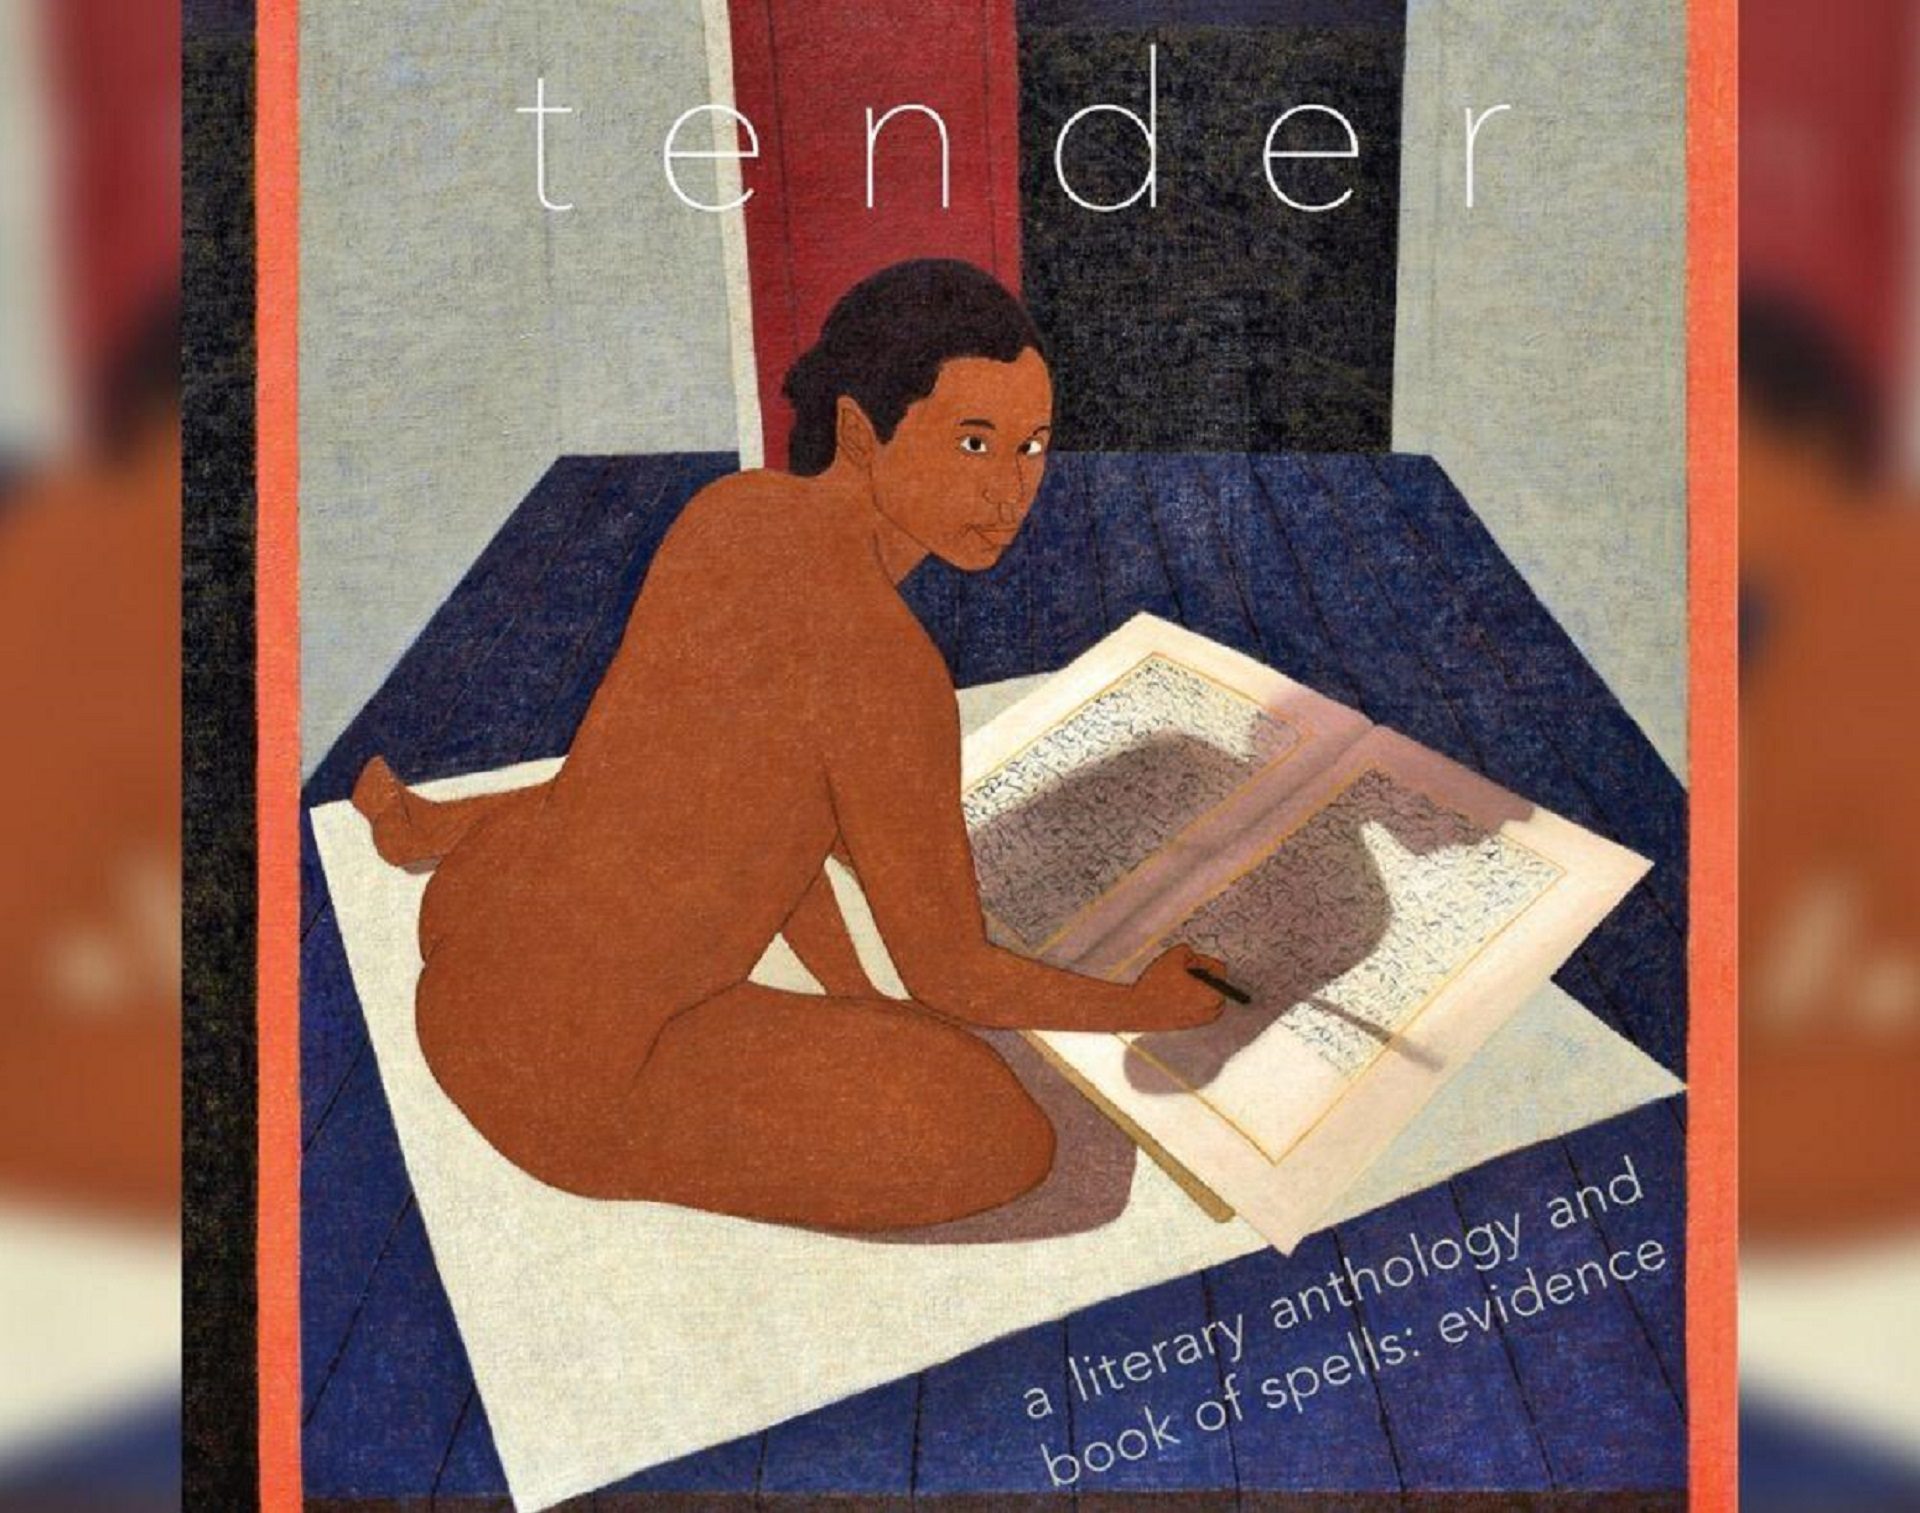 "tender" is a new literary anthology.